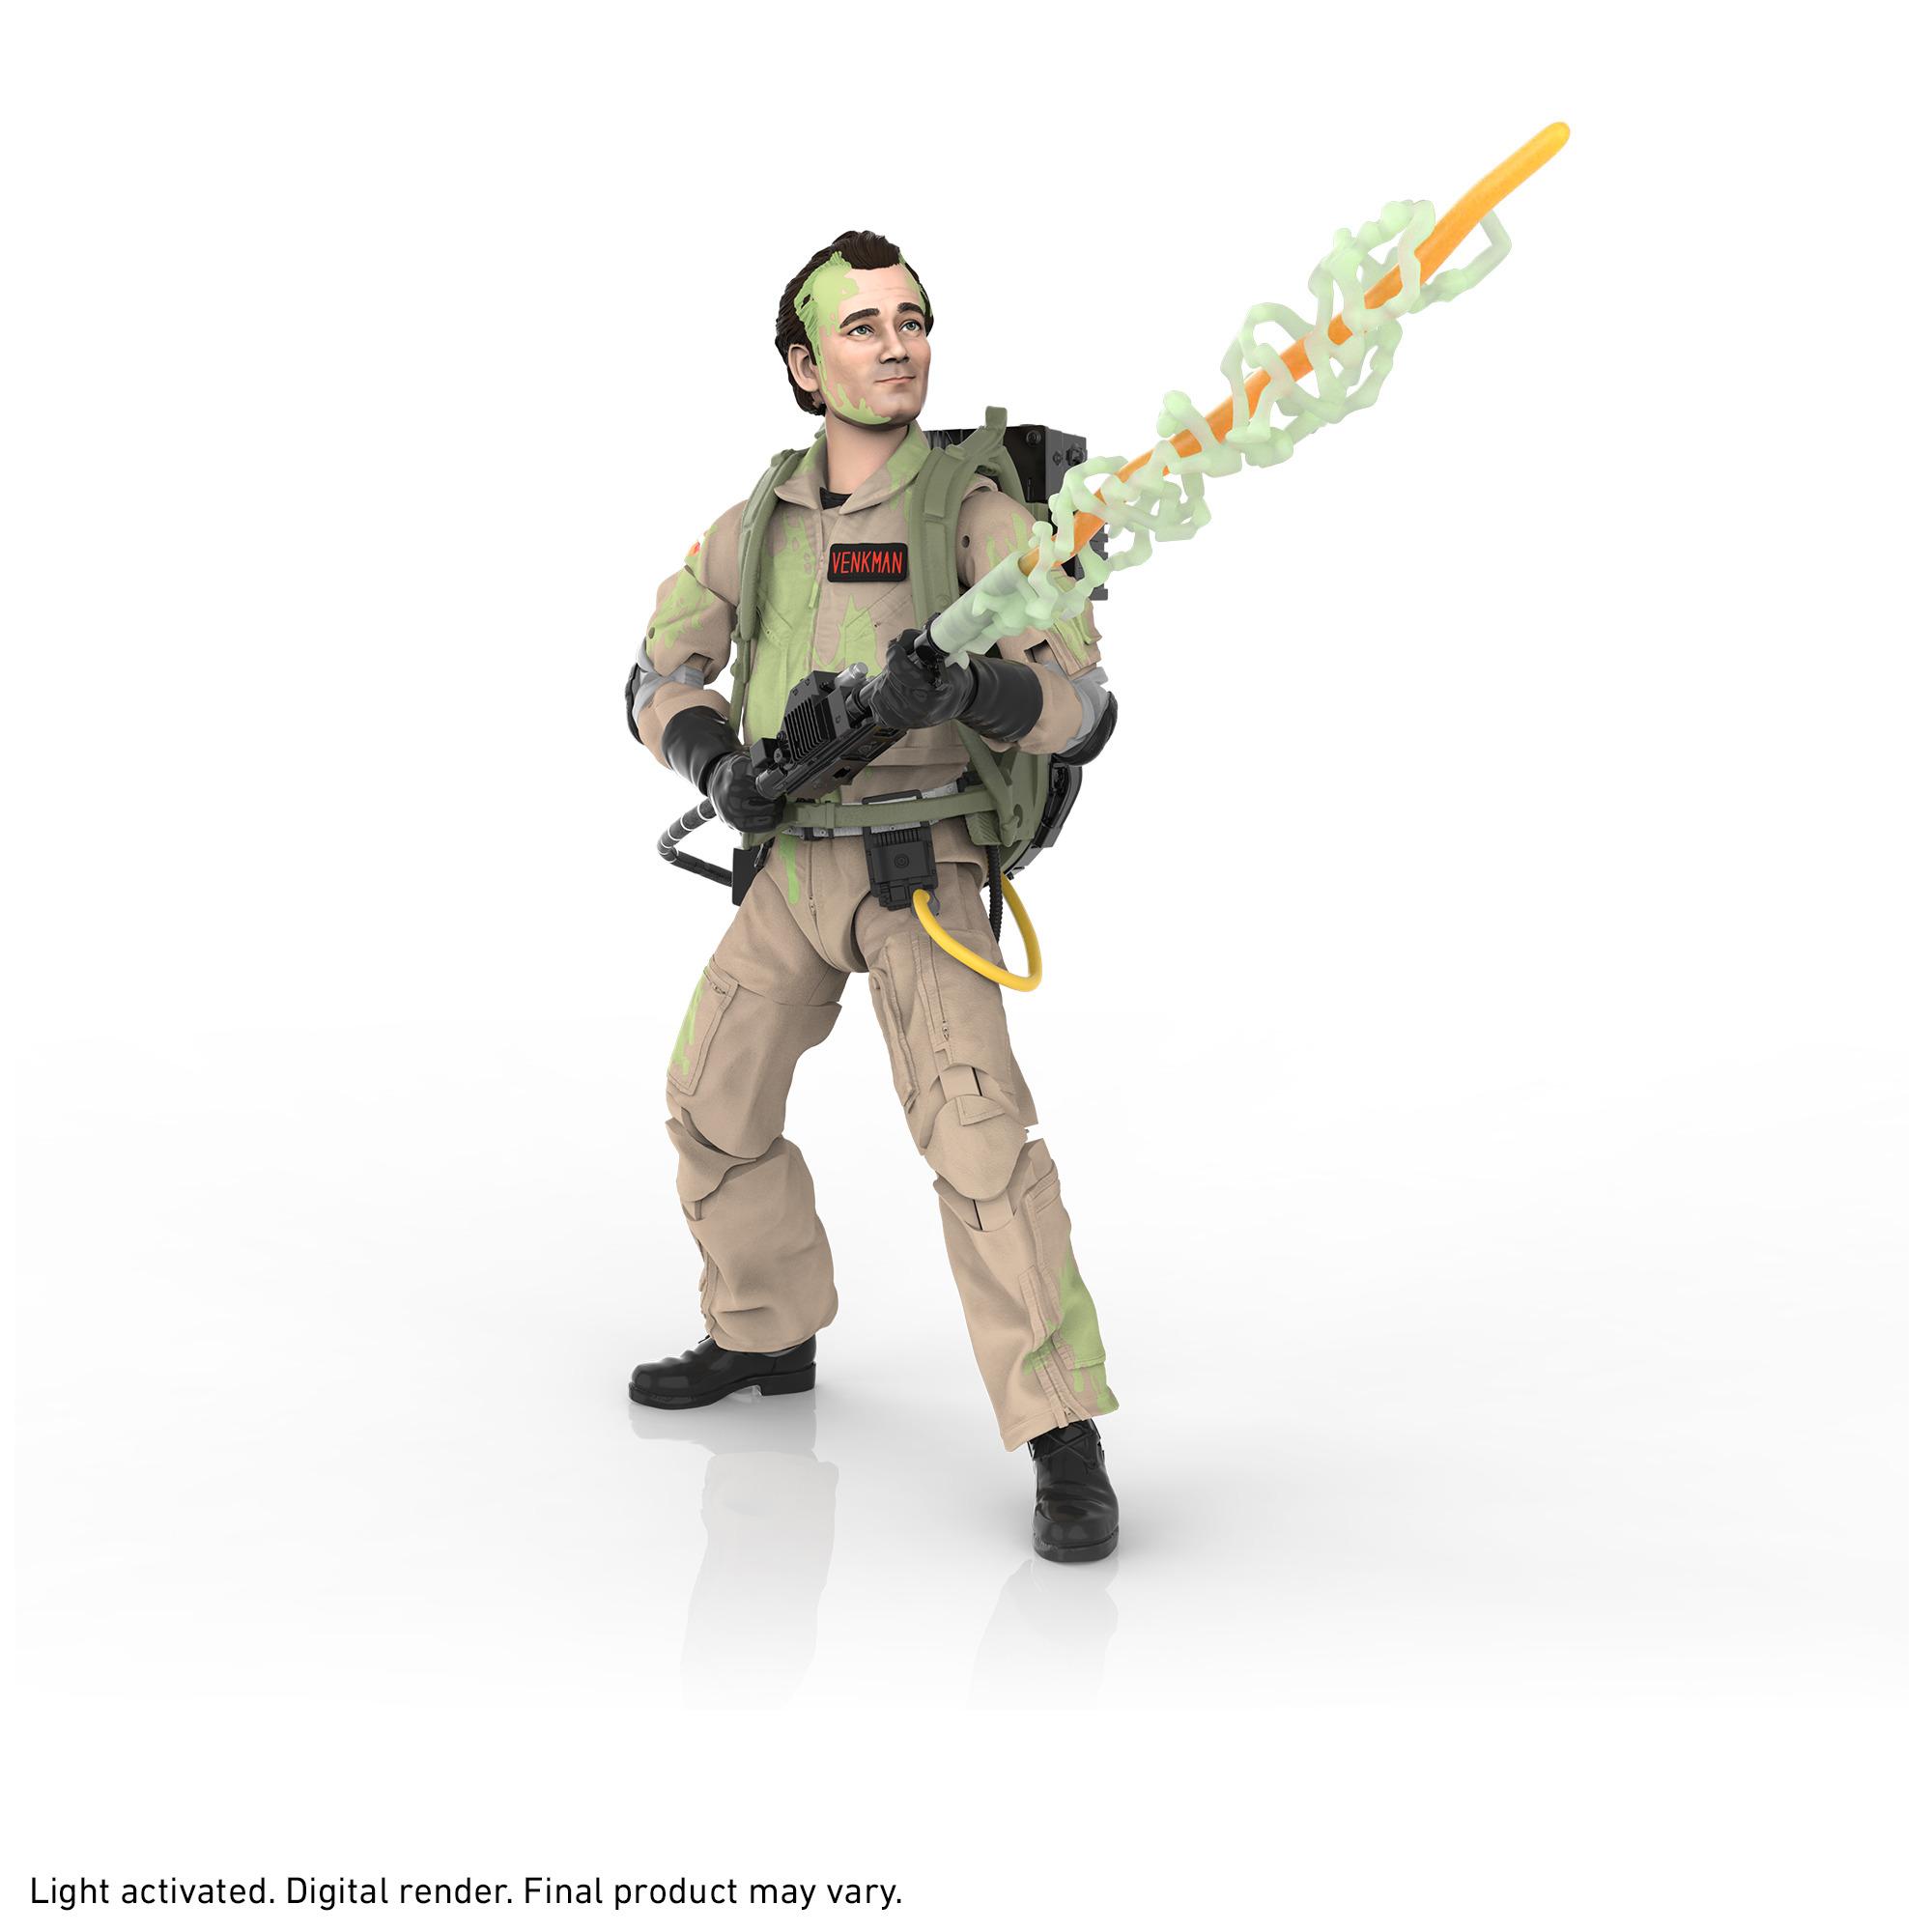 Ghostbusters Plasma Series Glow-in-the-Dark Peter Venkman Toy 6-Inch-Scale Collectible Classic 1984 Ghostbusters Figure